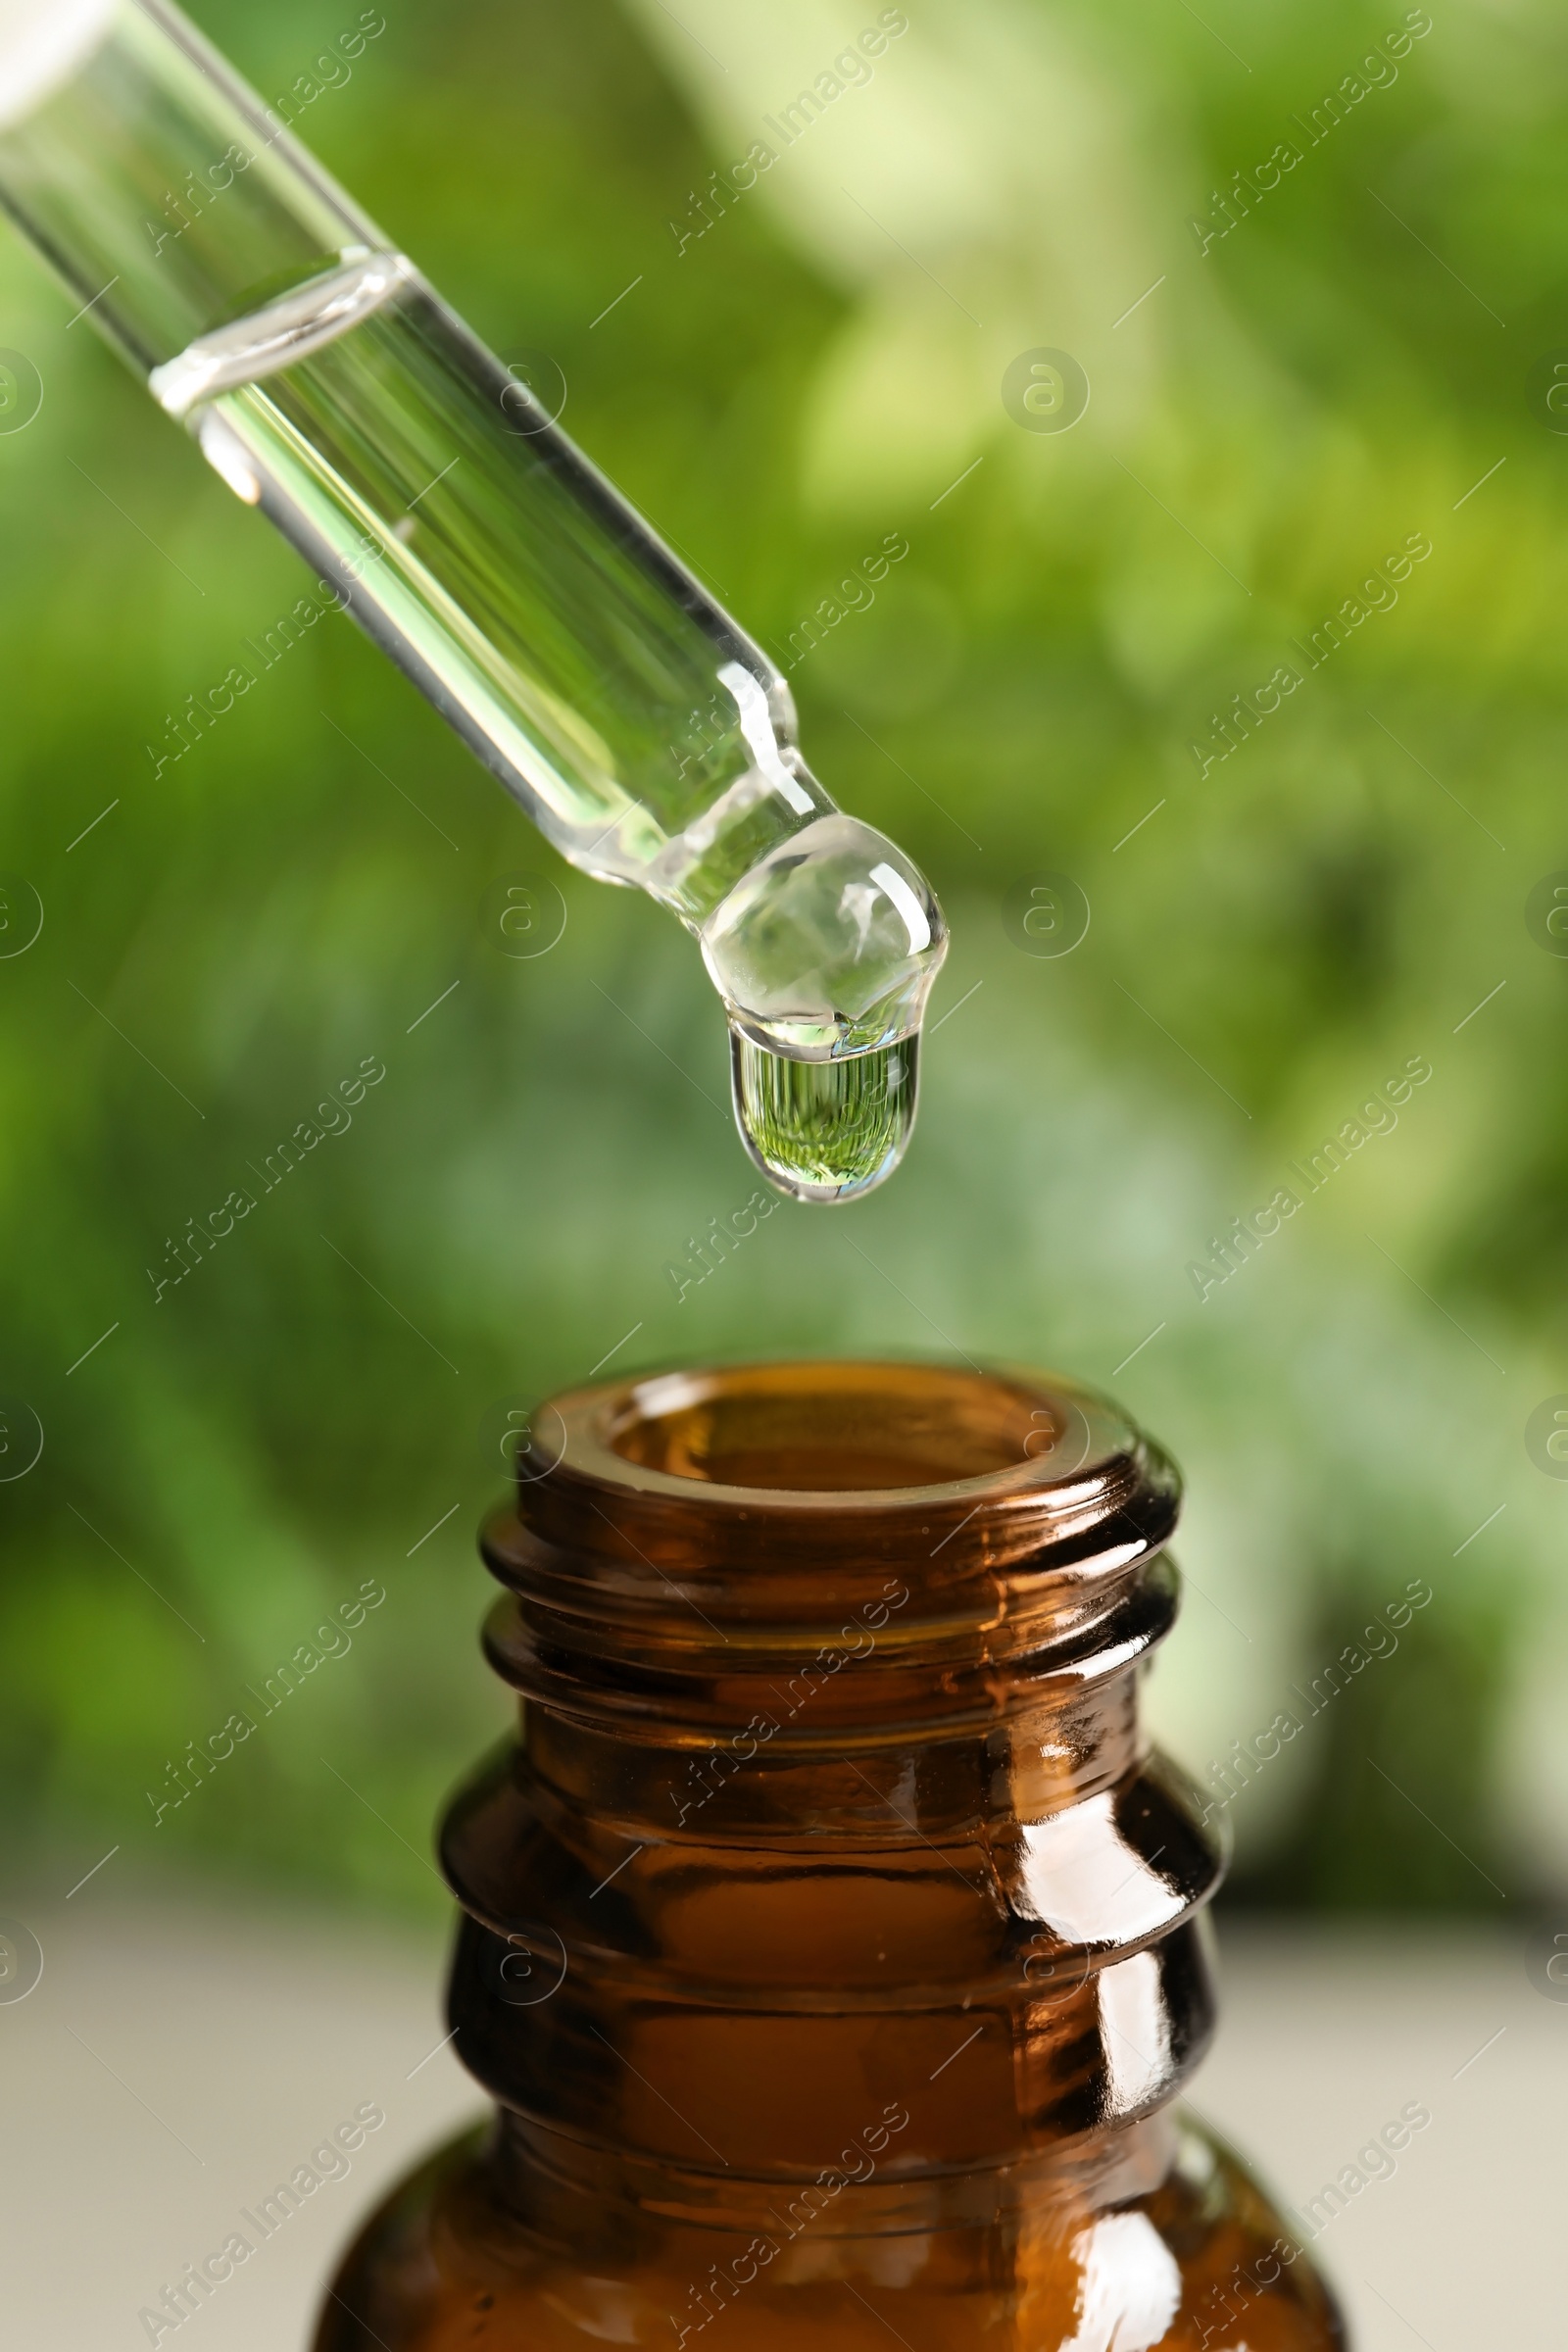 Photo of Pipette with oil over bottle on blurred background